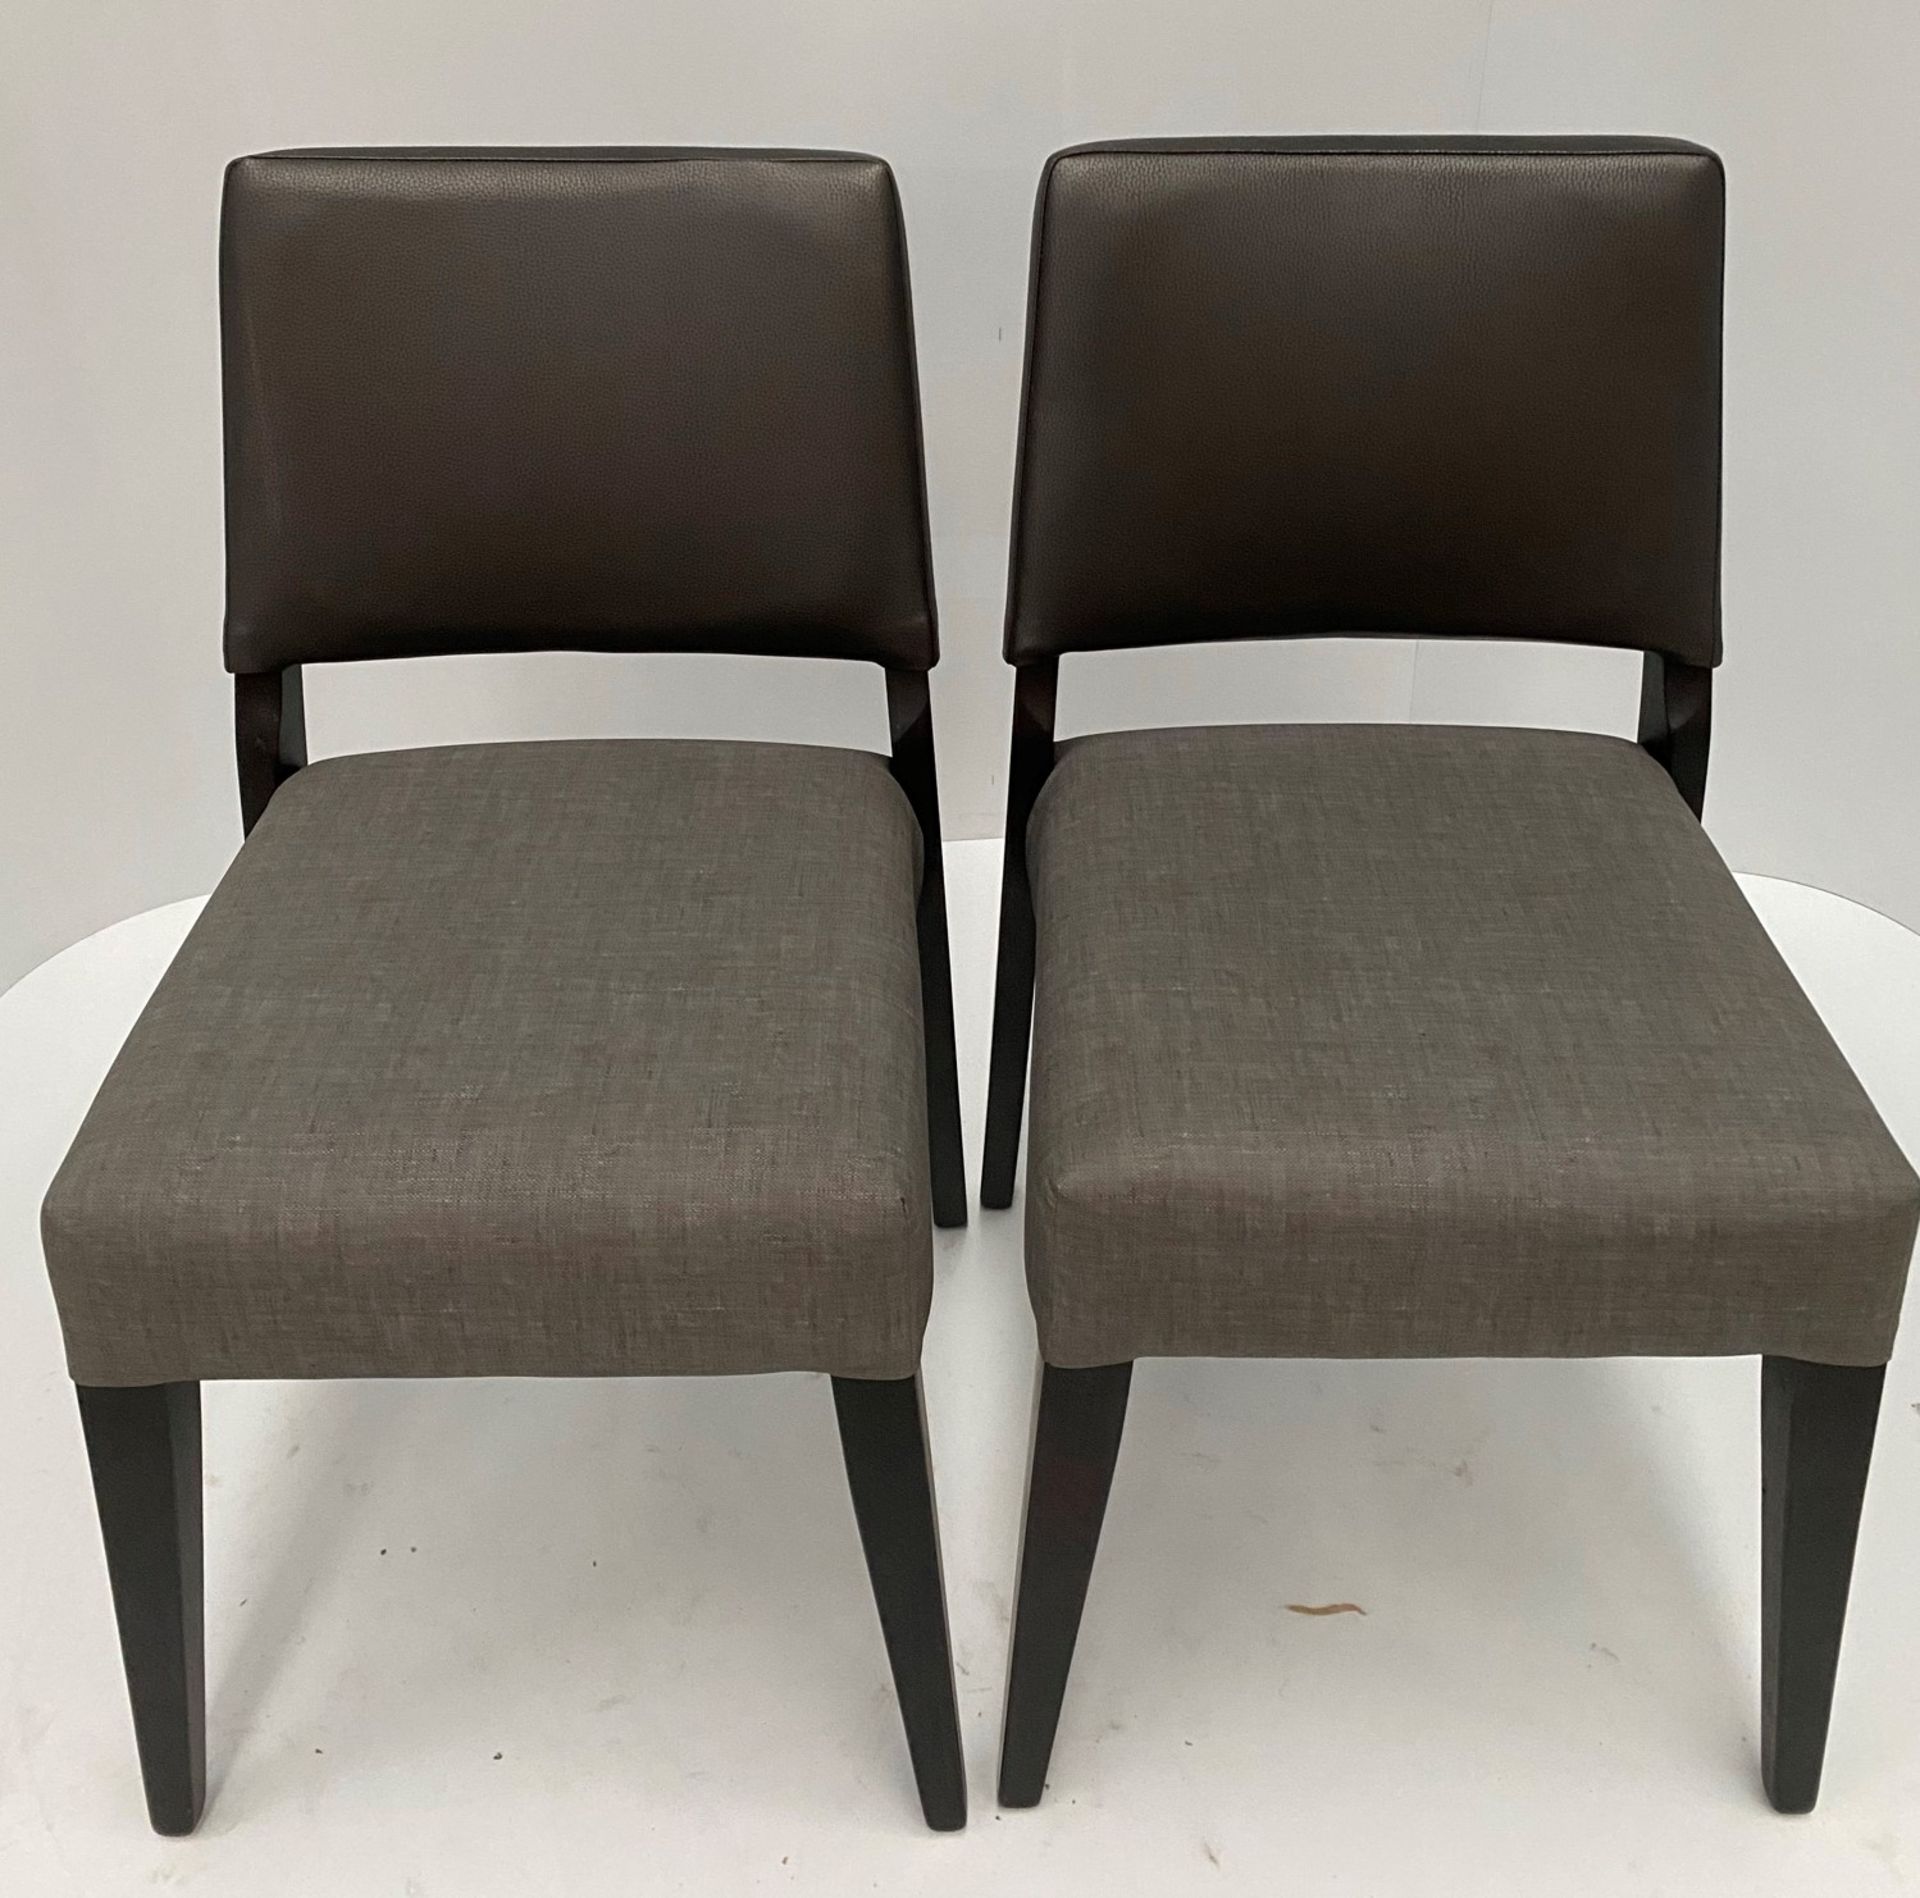 2 x Reuben fully upholstered side/dining chairs.